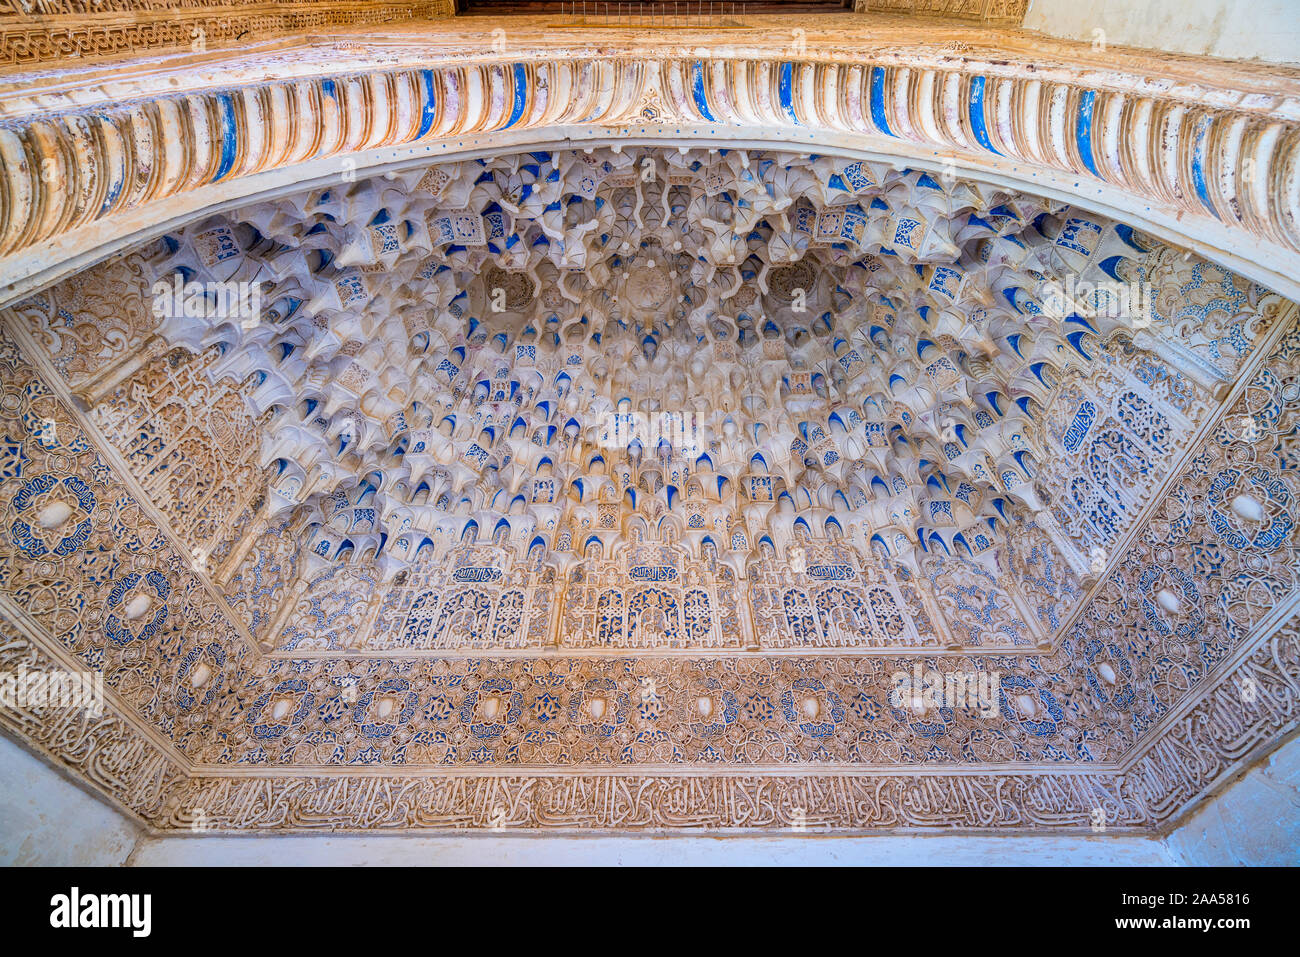 Finely decorated vault in the Alhambra Palace in Granada. Andalusia, Spain. June-03-2019 Stock Photo